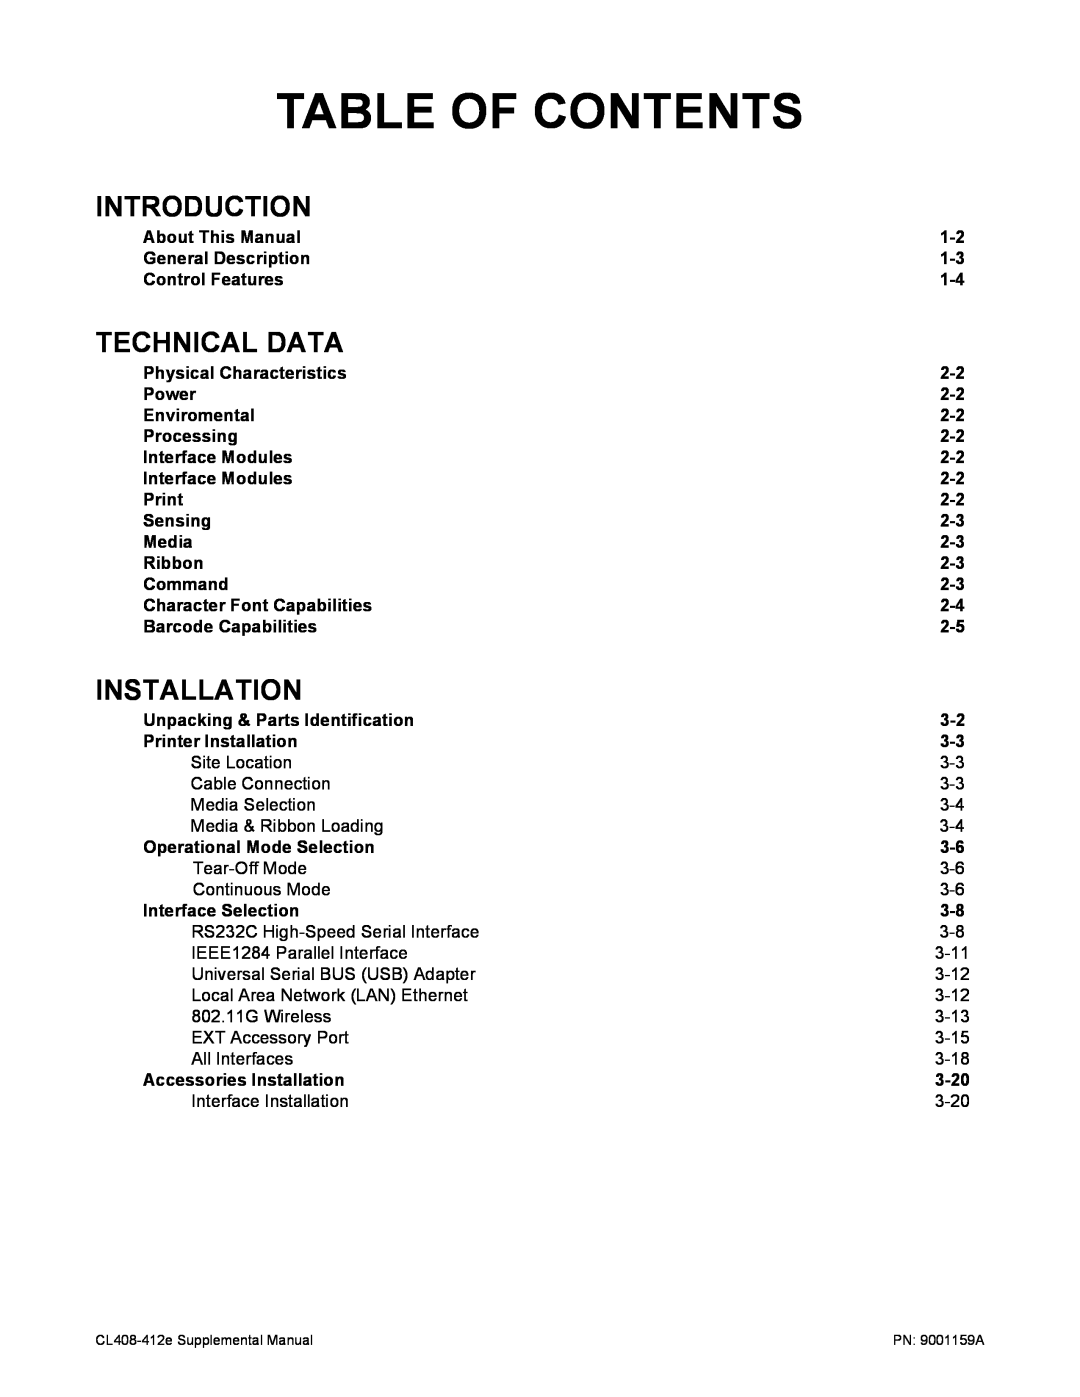 SATO CL408-412e manual Introduction, Technical Data, Installation, Table Of Contents 